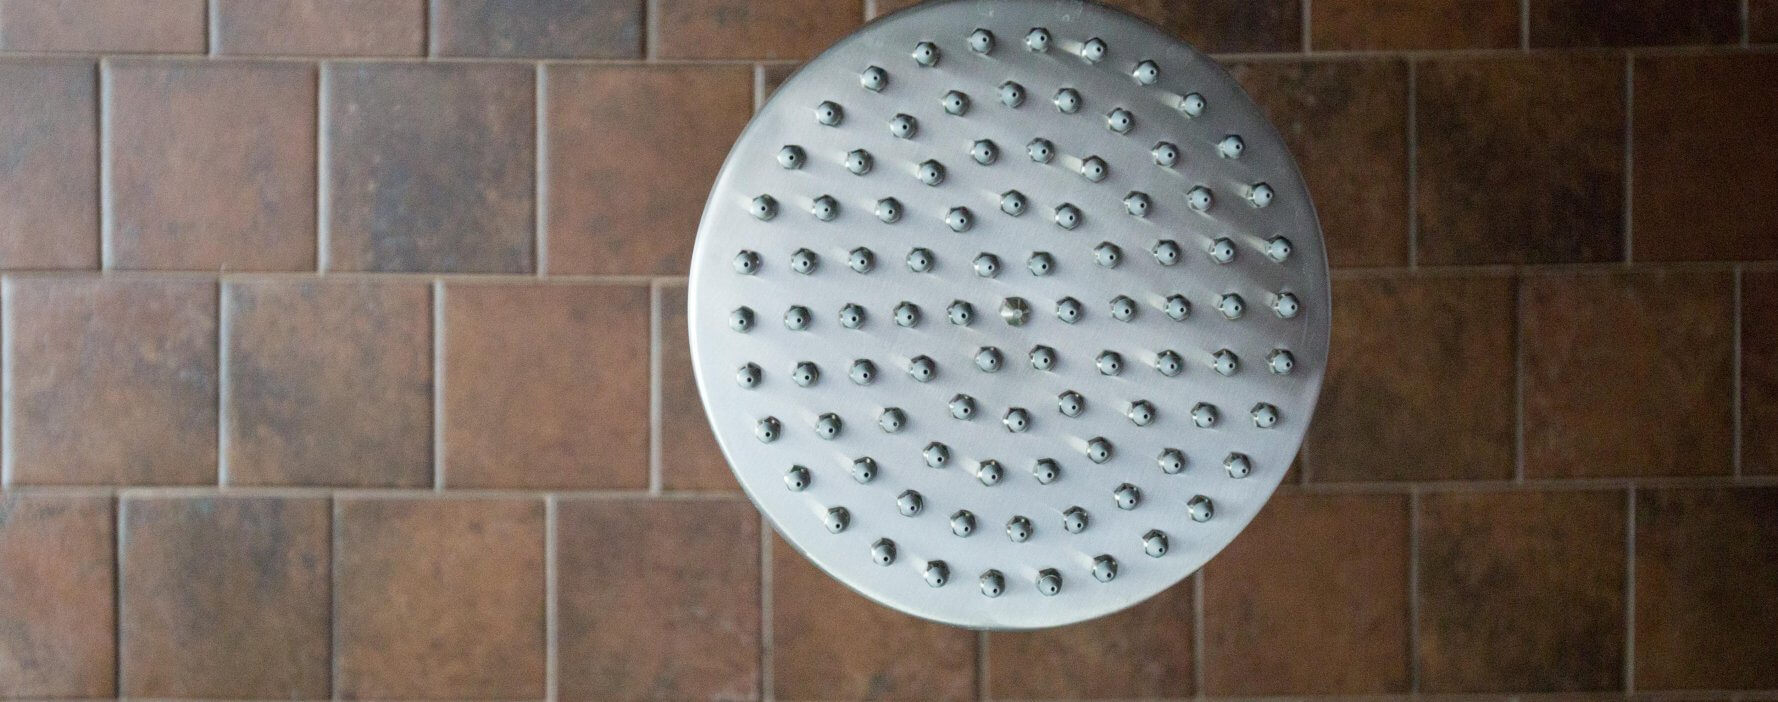 a close up of a shower head on a tiled wall